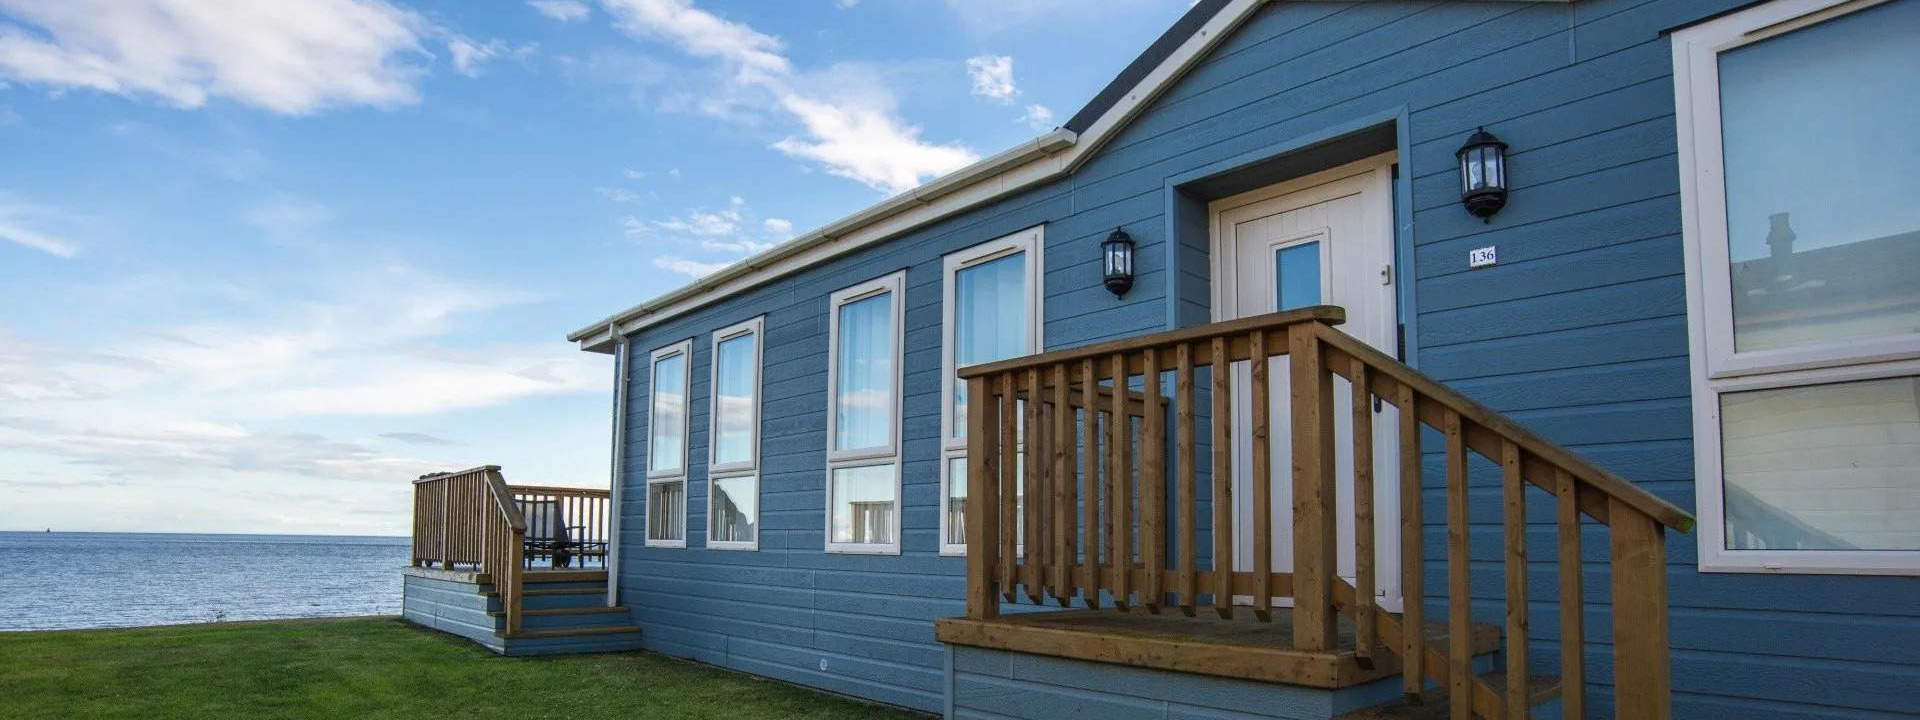 Get Amazing Offers On Selected Holiday Homes This Summer!